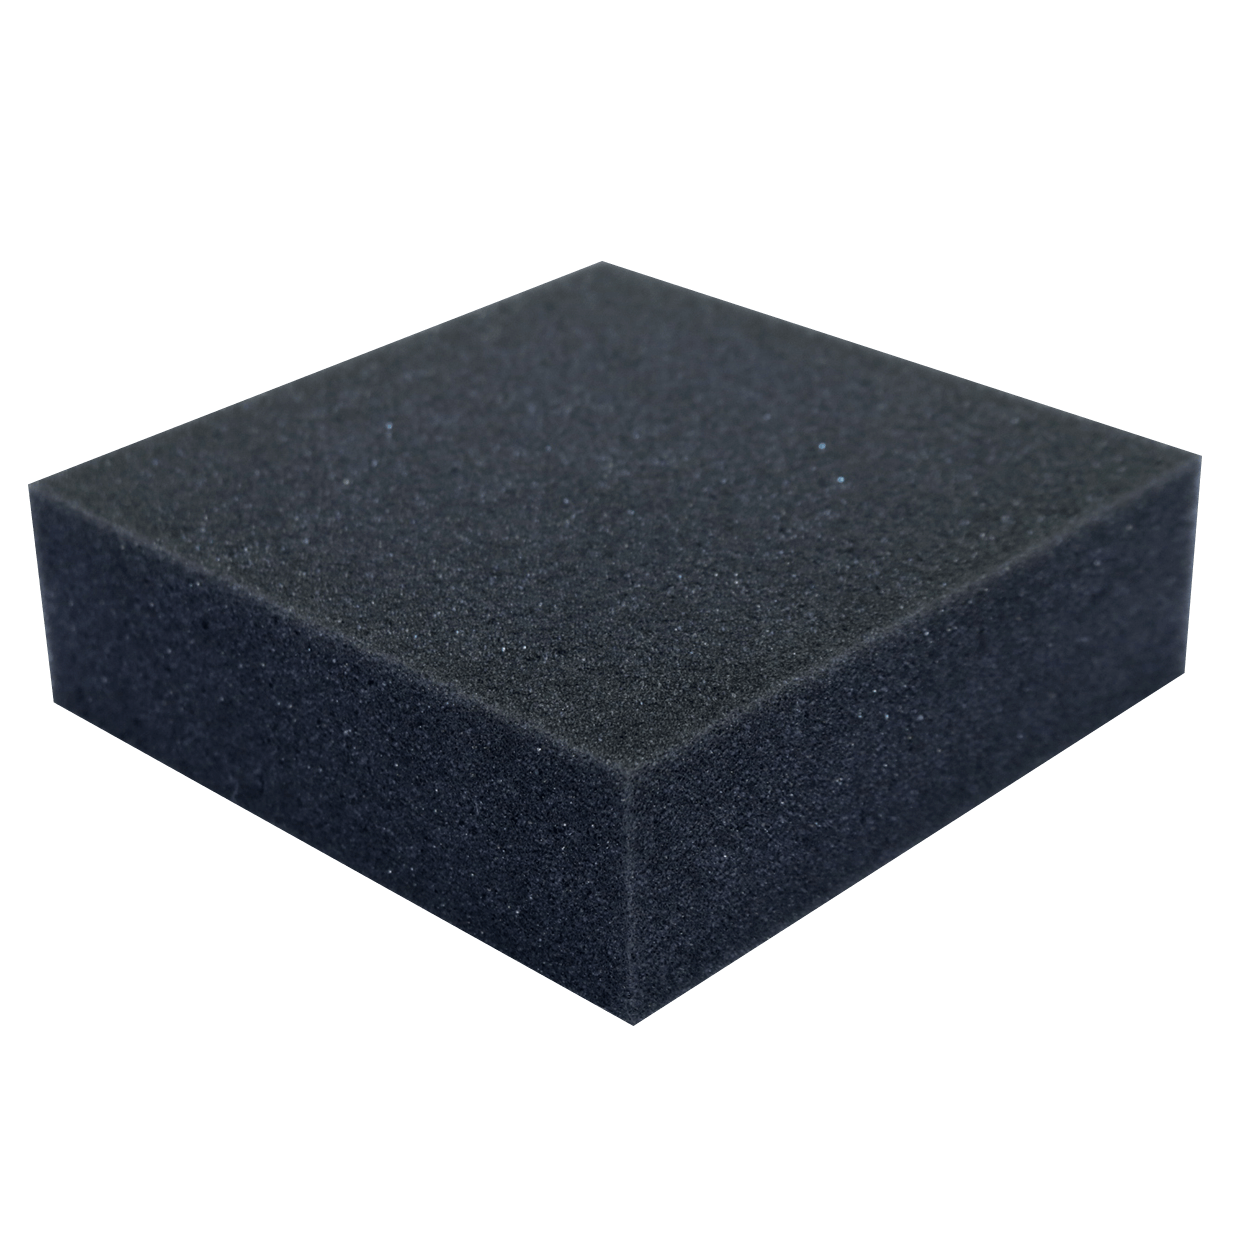 2" thick 0.9lb Ether Foam